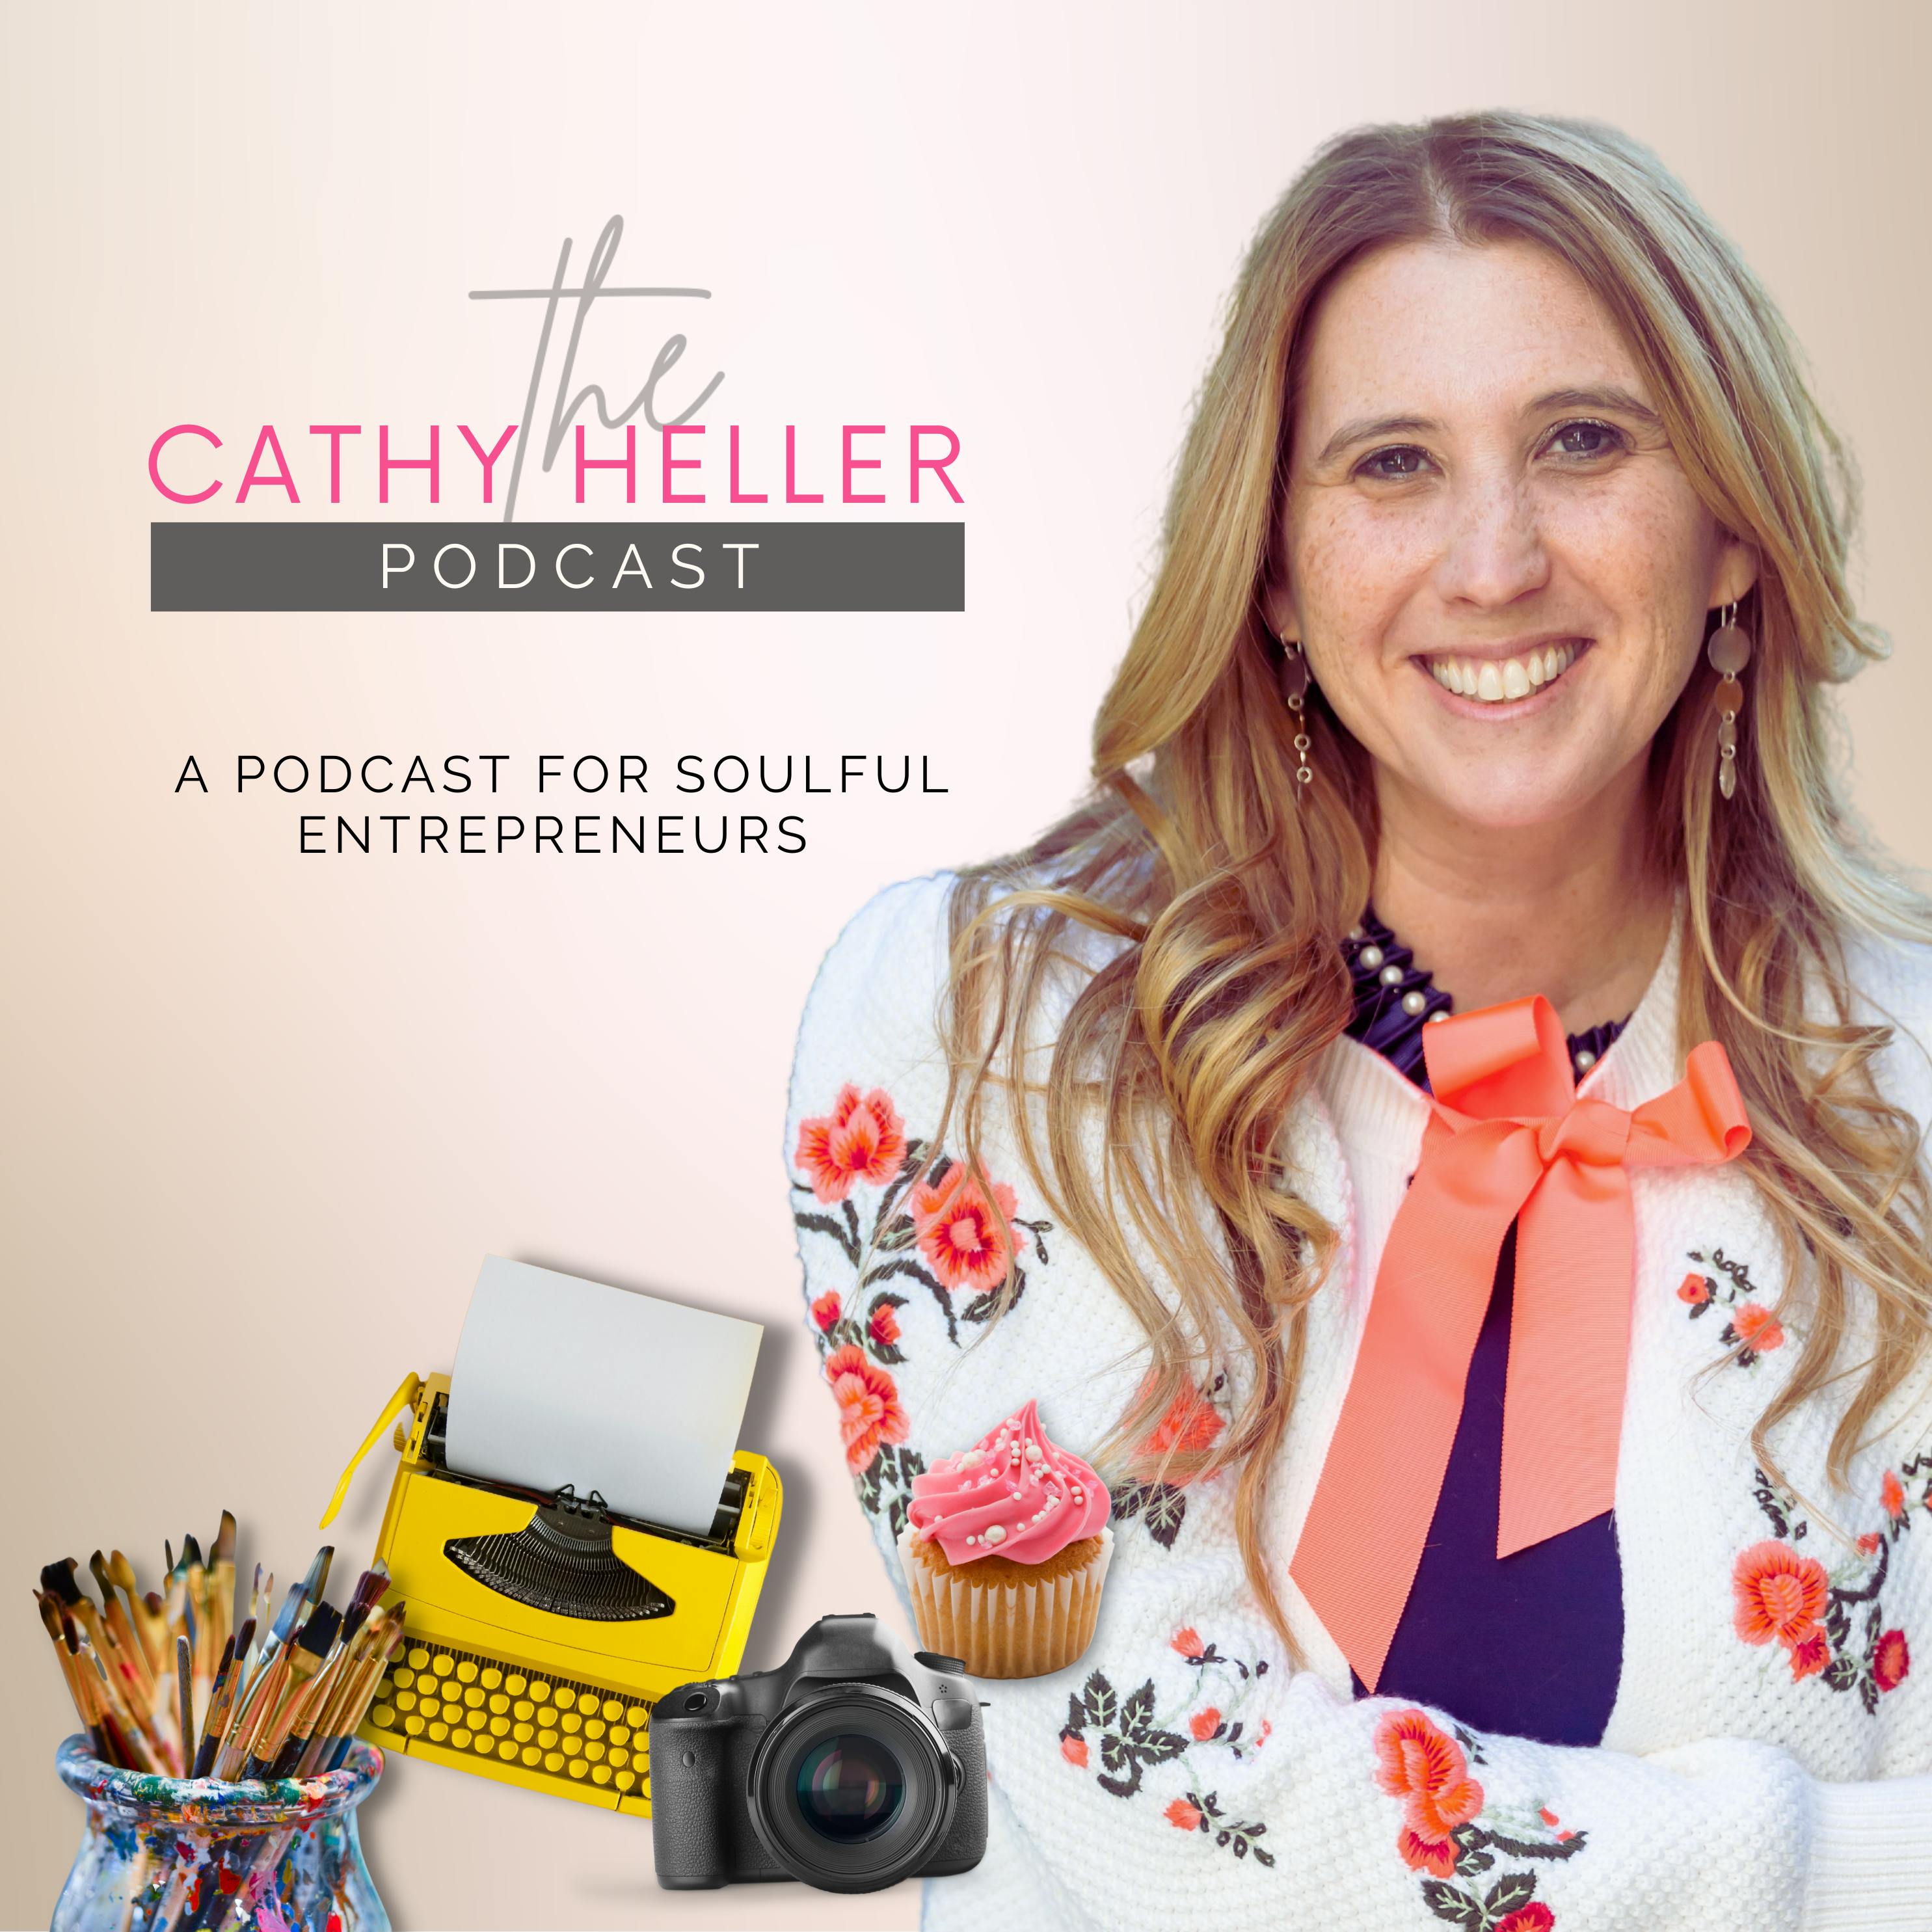 Netflix Star Shares How to Destroy Fear, Find Your Worth & Be More  Confident - Julia Haart, Serial Entrepreneur & Best Selling Author - Behind  Her Empire